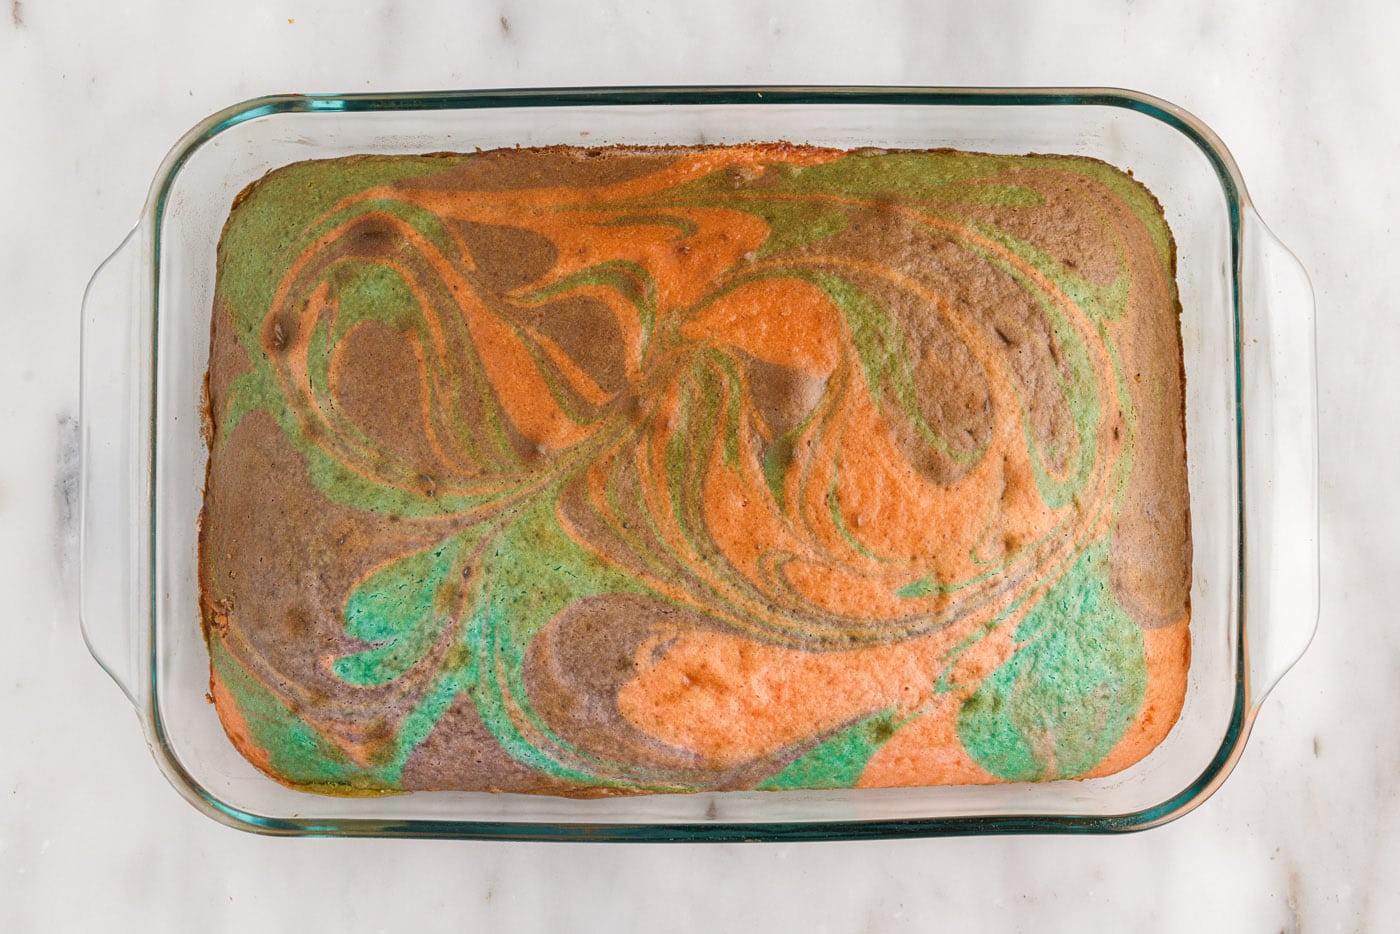 baked easter cake with swirls of color